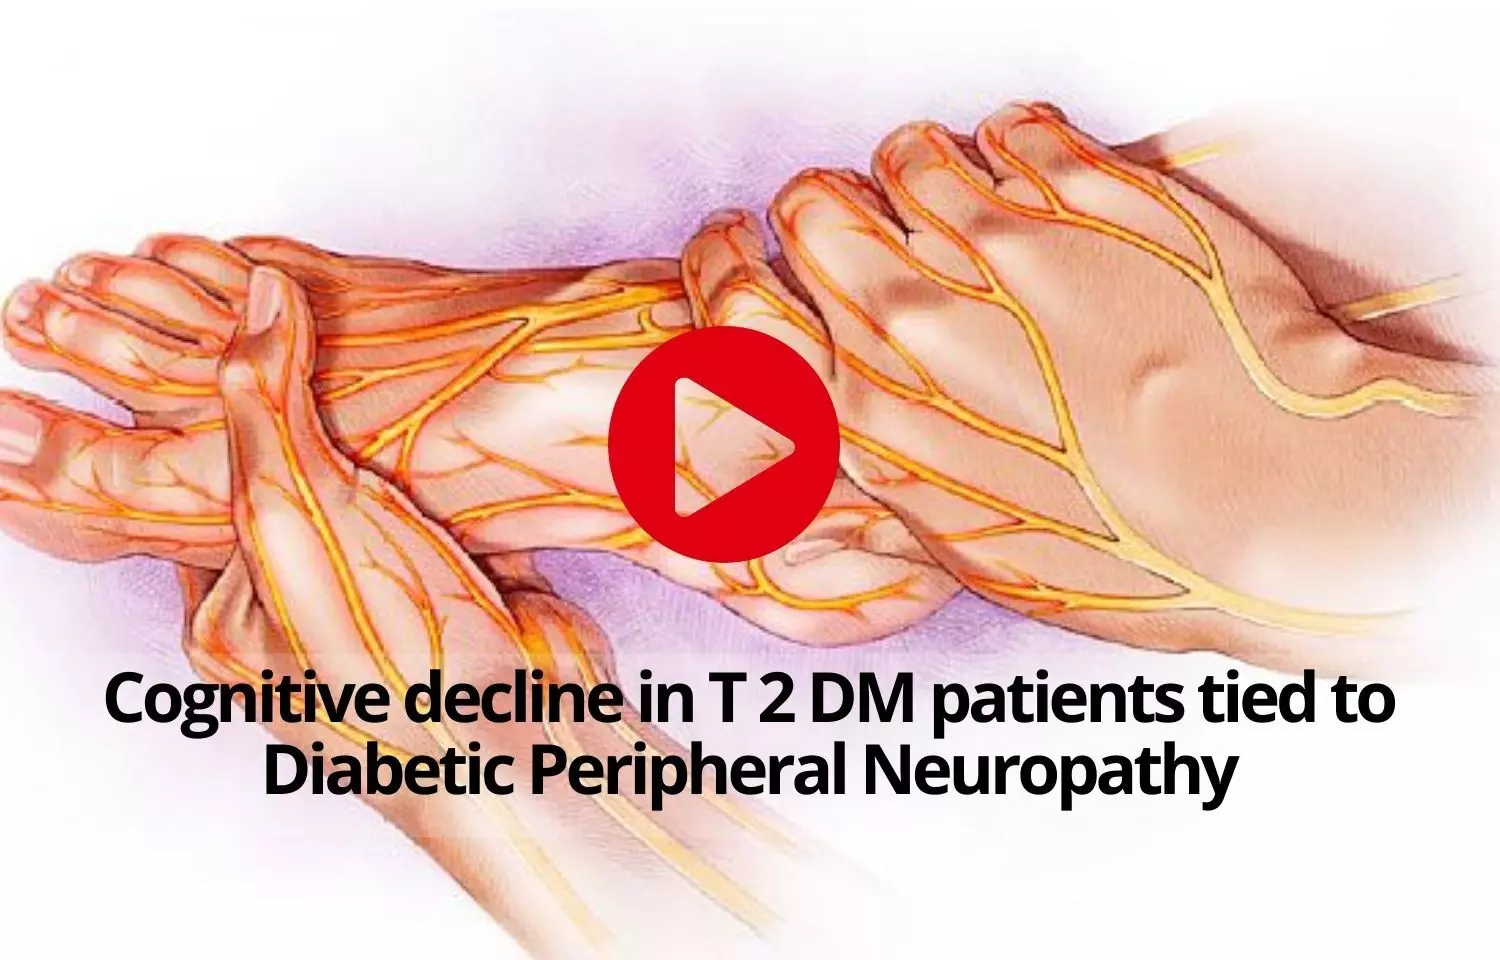 Cognitive decline in T 2 DM patients tied to Diabetic Peripheral Neuropathy